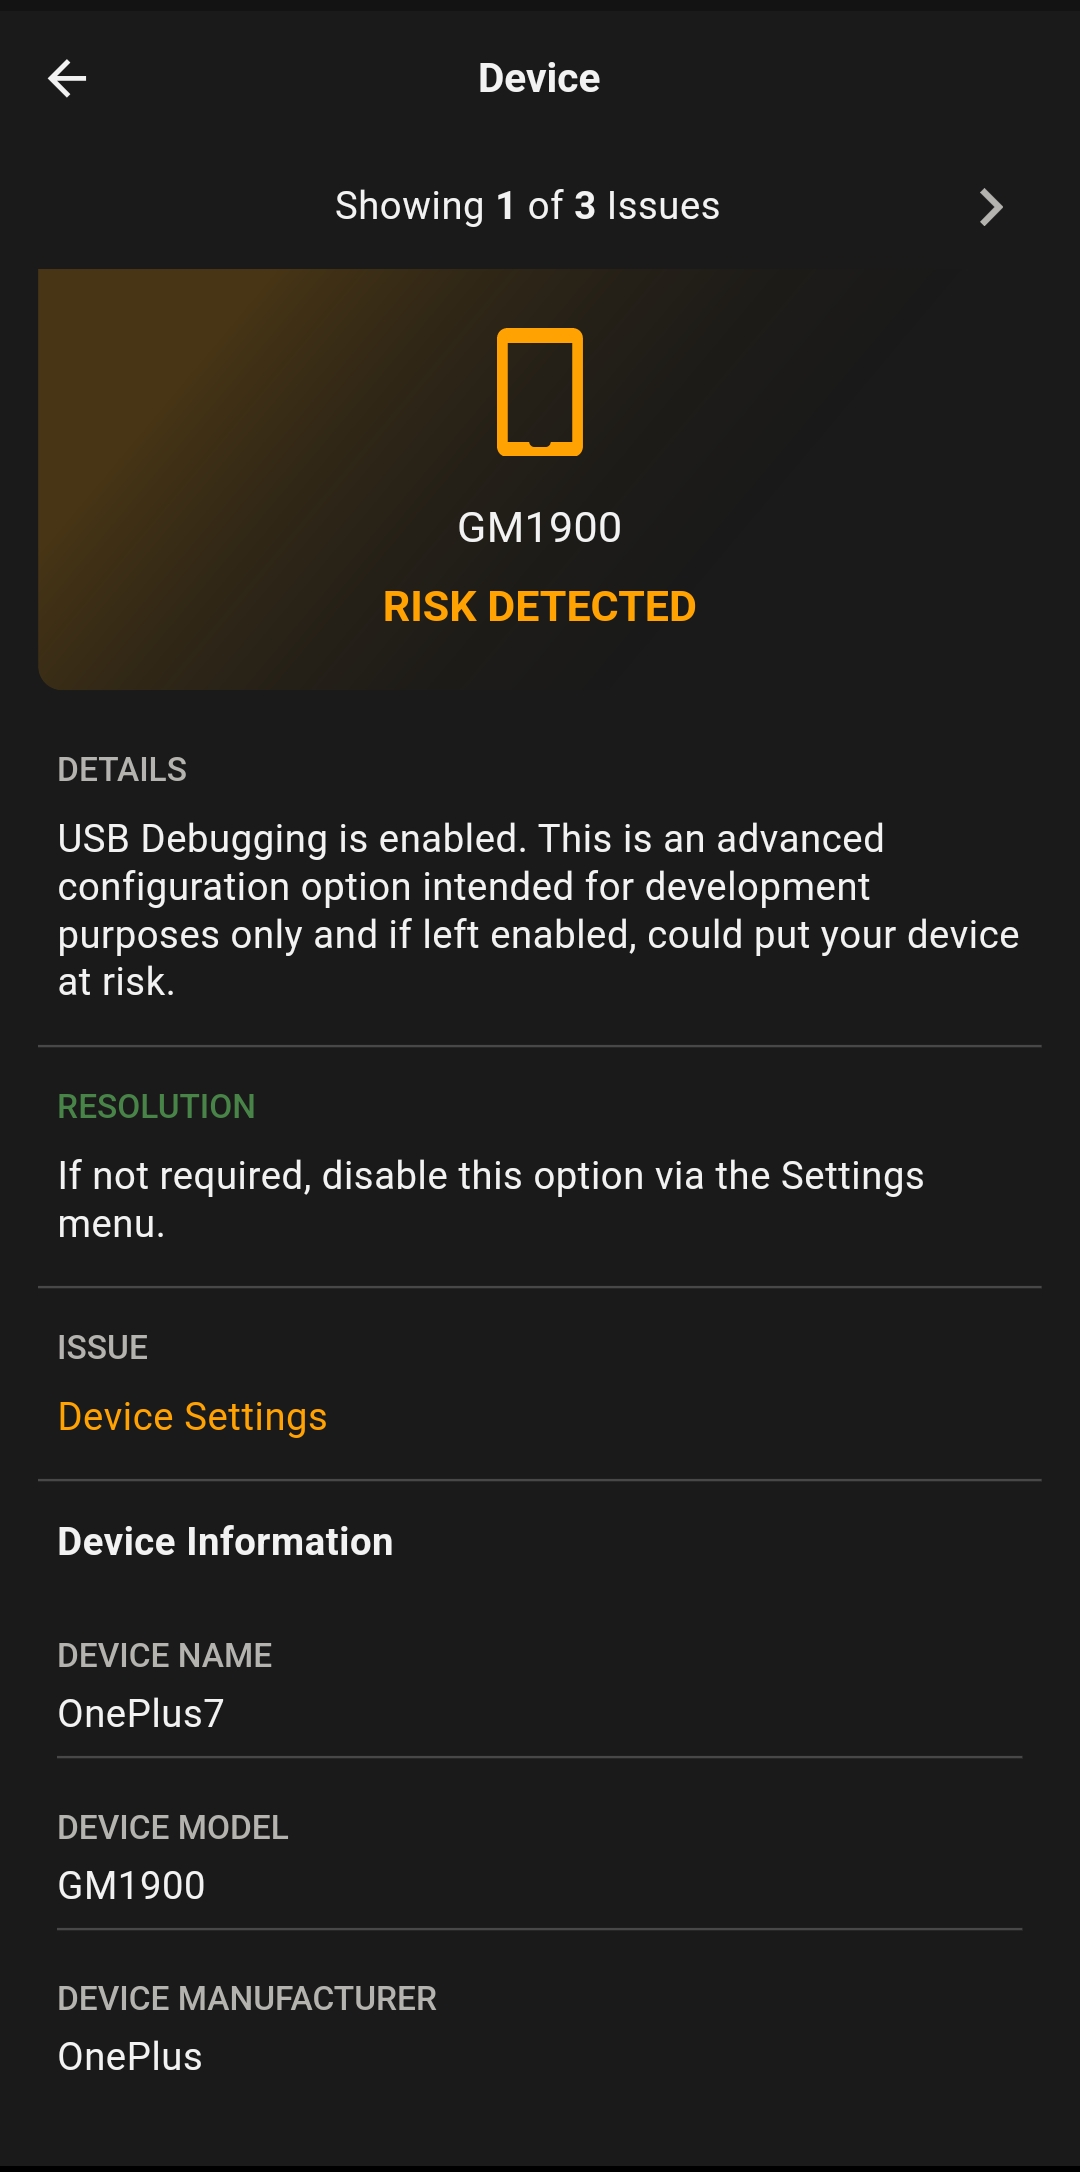 Mobile-security-app-device-_risk-detected-fix.jpg